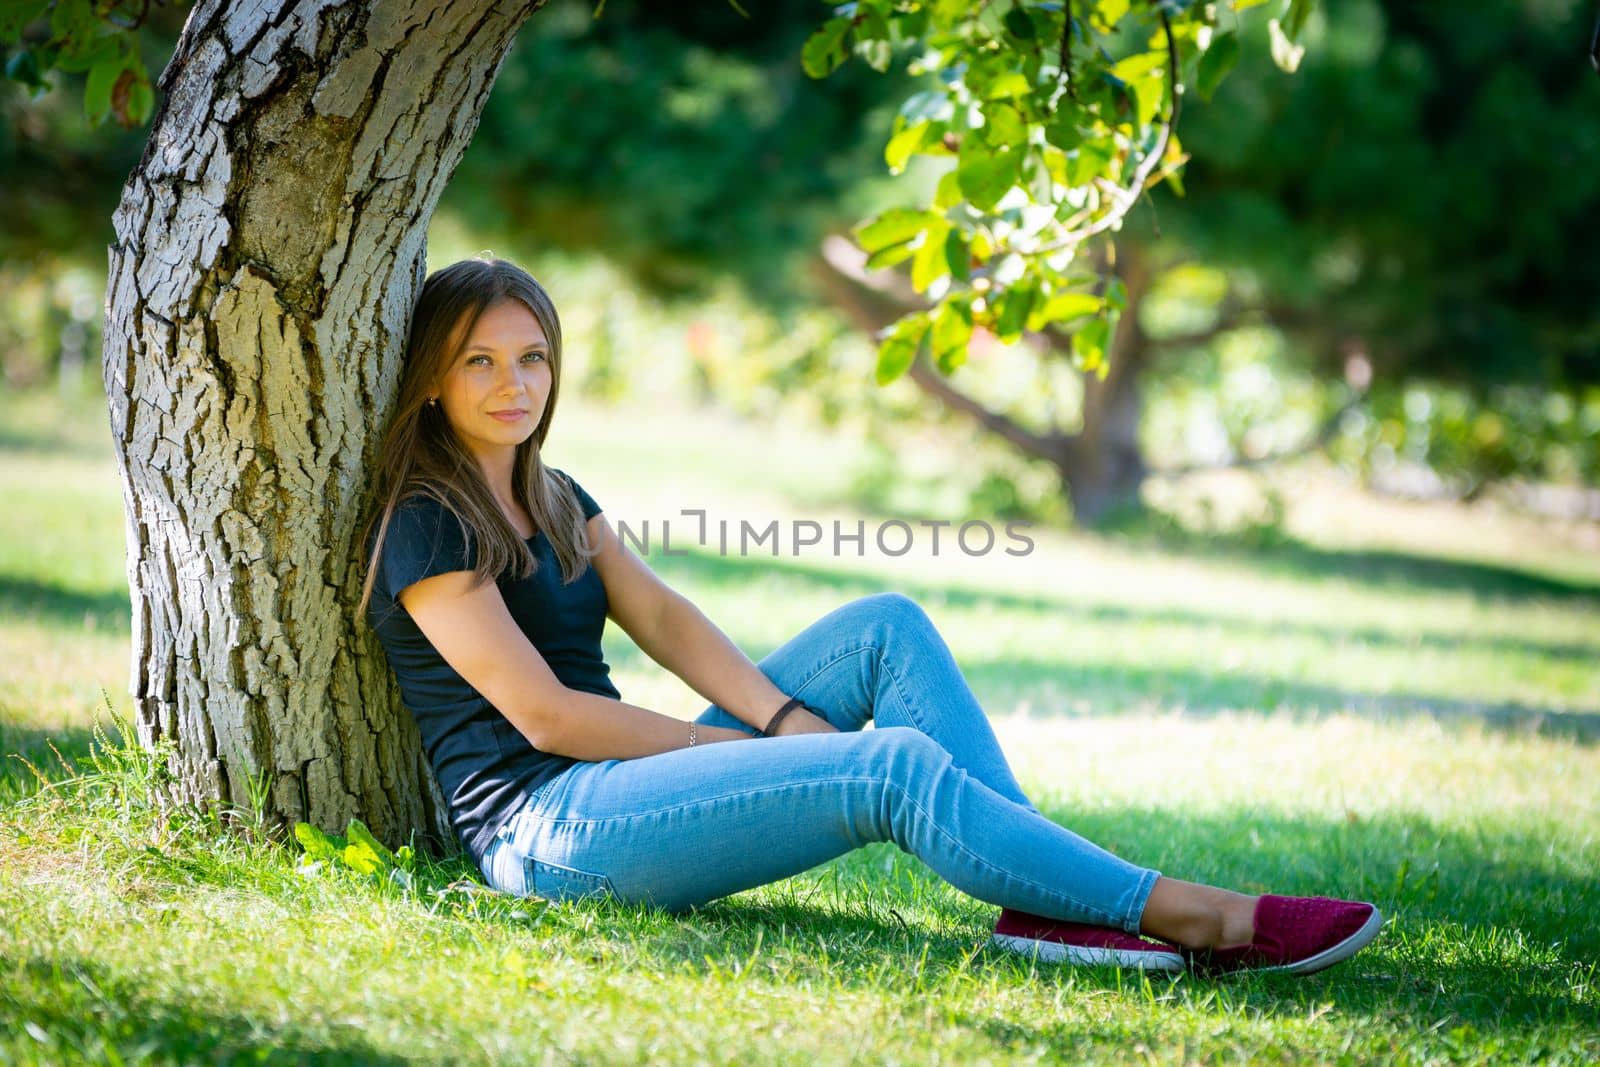 A girl sits under a tree in a sunny park and looks into the frame by Madhourse